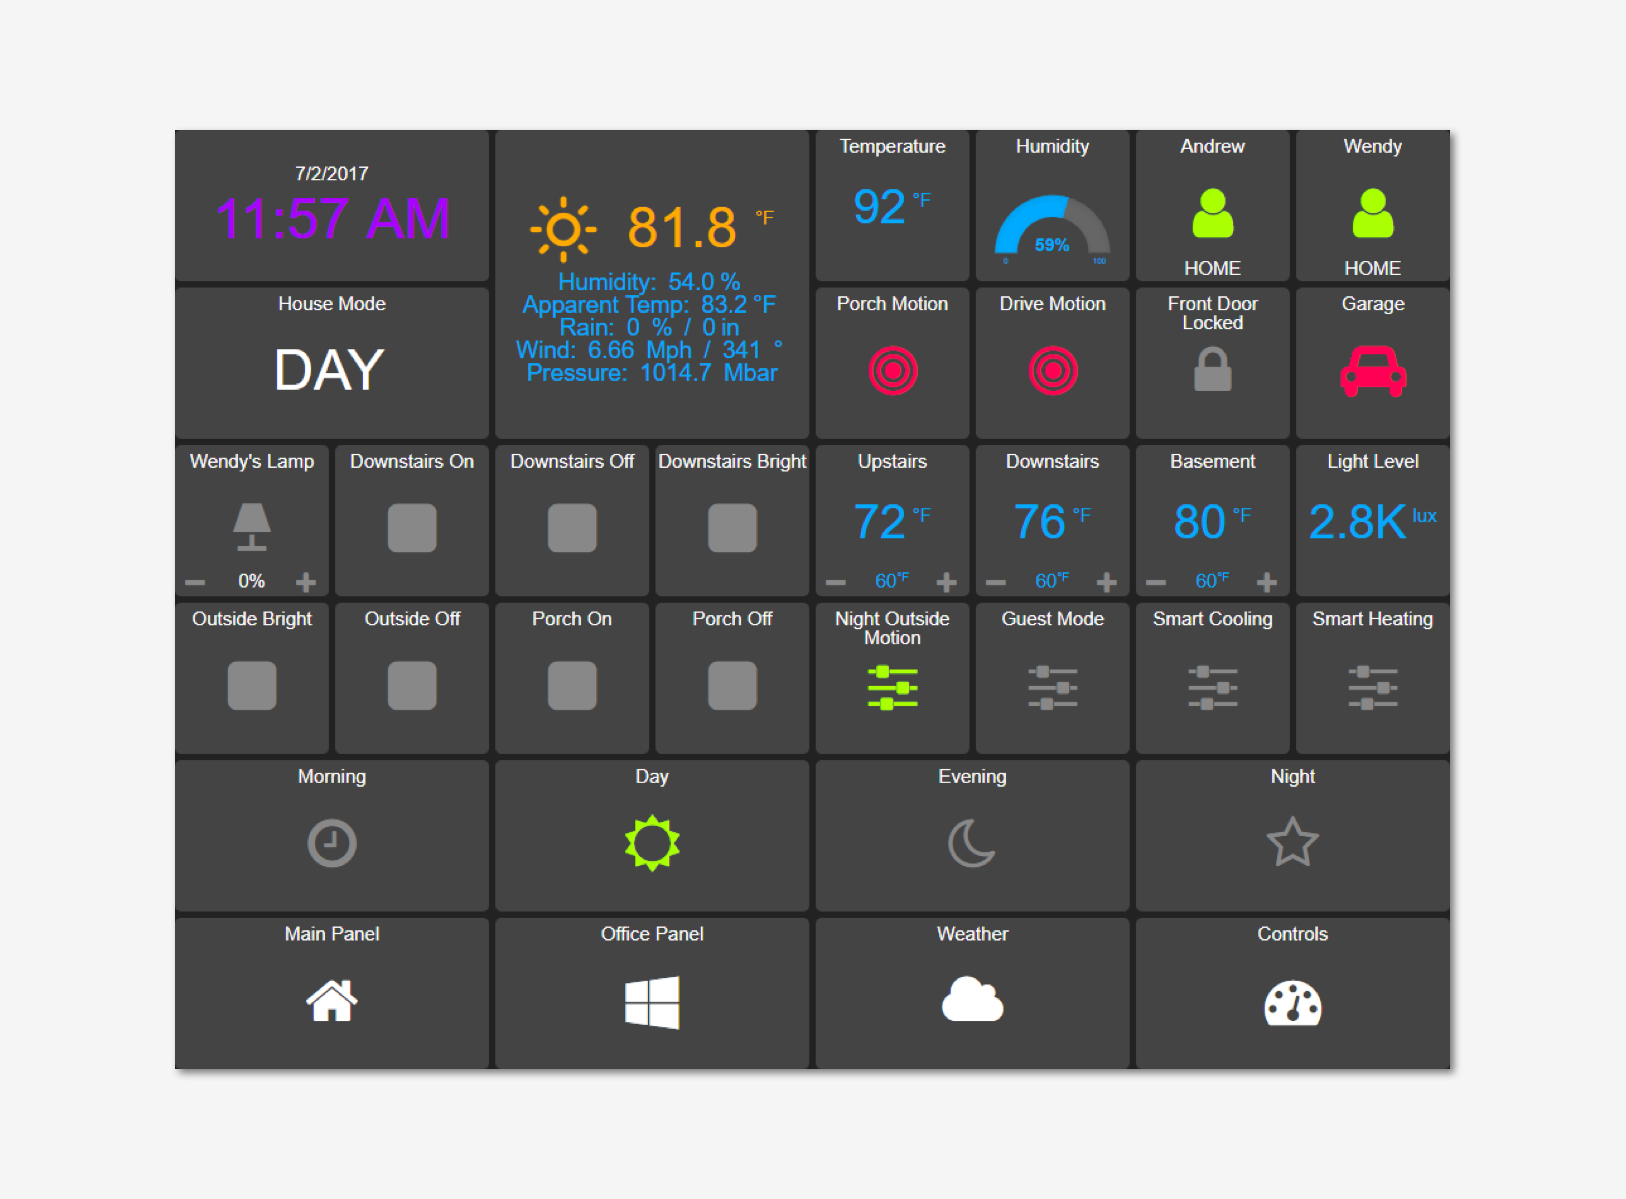 The current Home Assistant dashboard that was in need of making more user friendly and visually appealing

